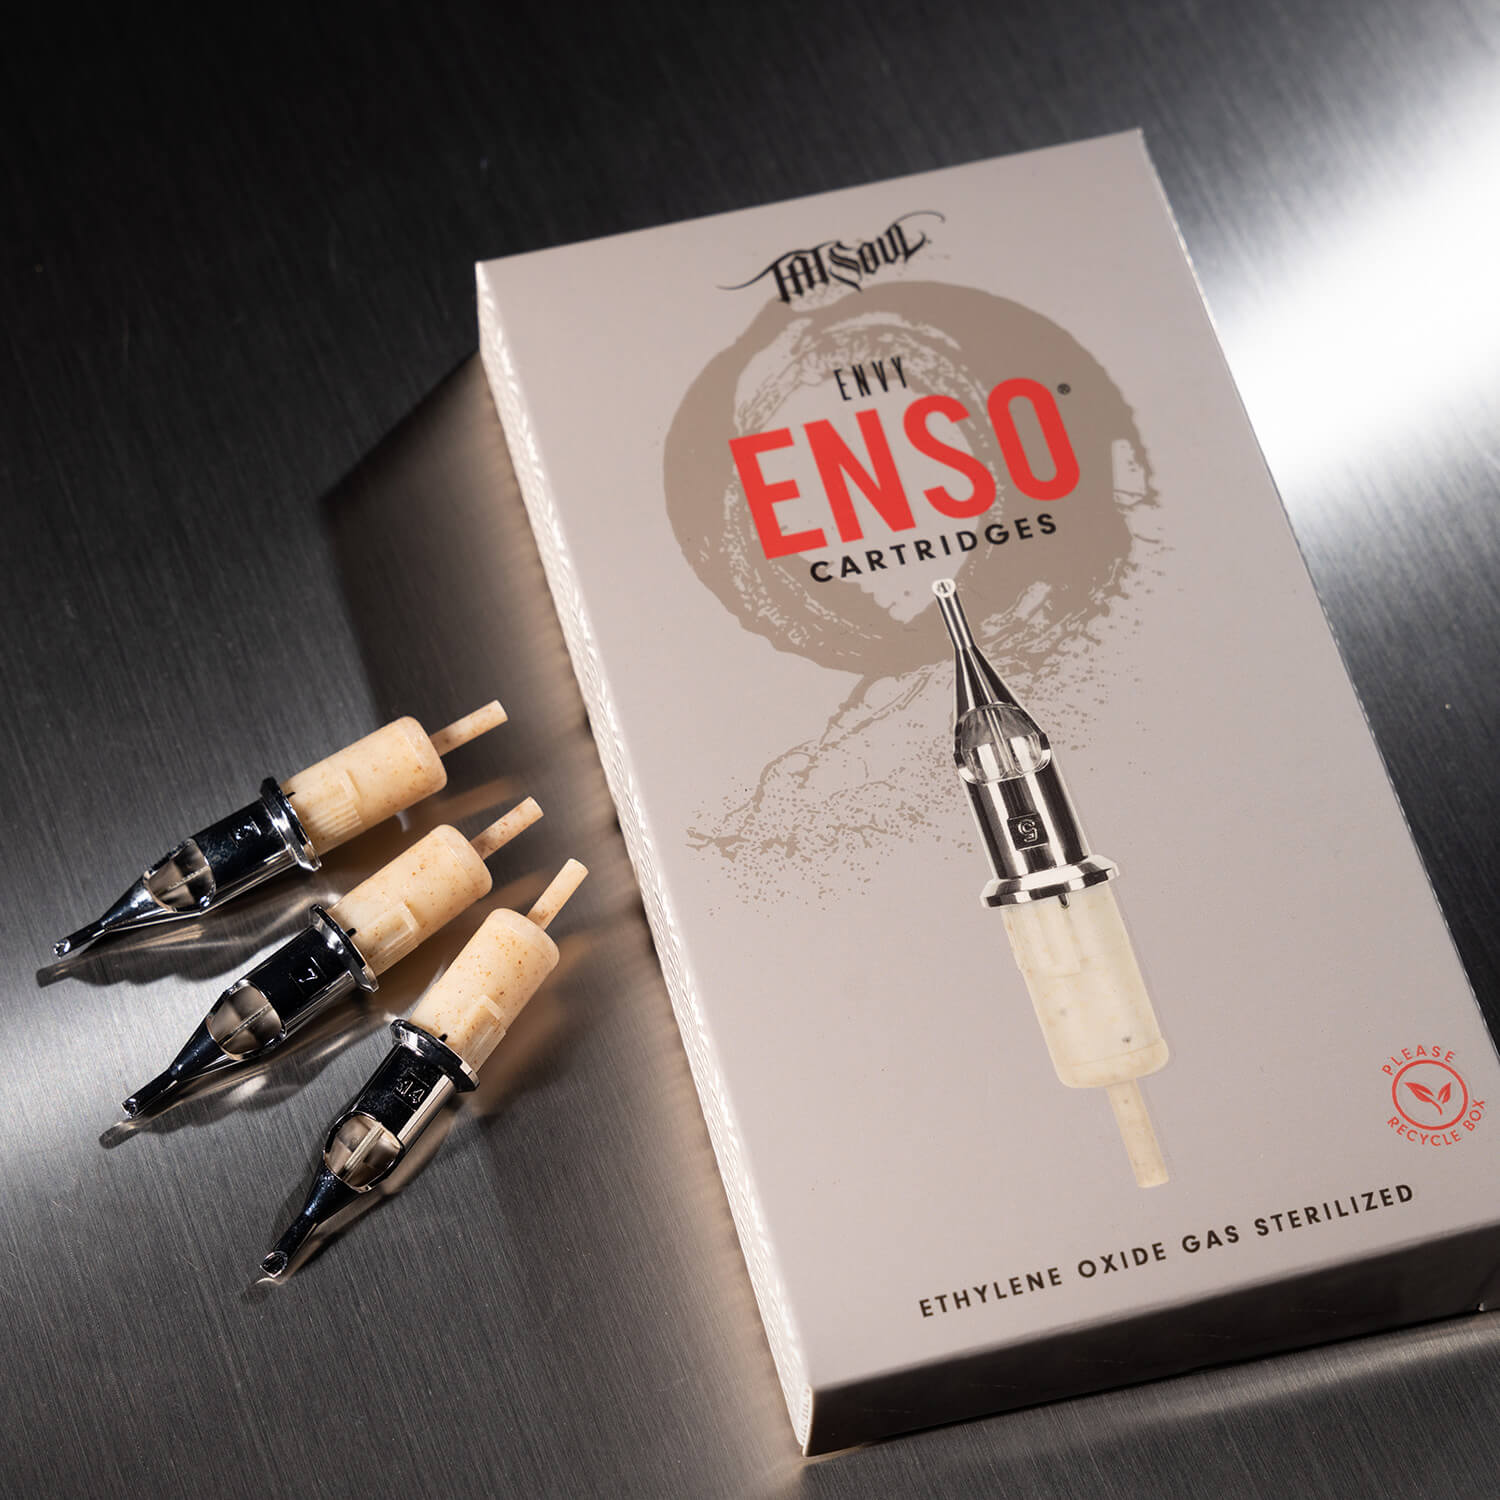 A box of ENSO cartridges, made and sold by TATSoul.